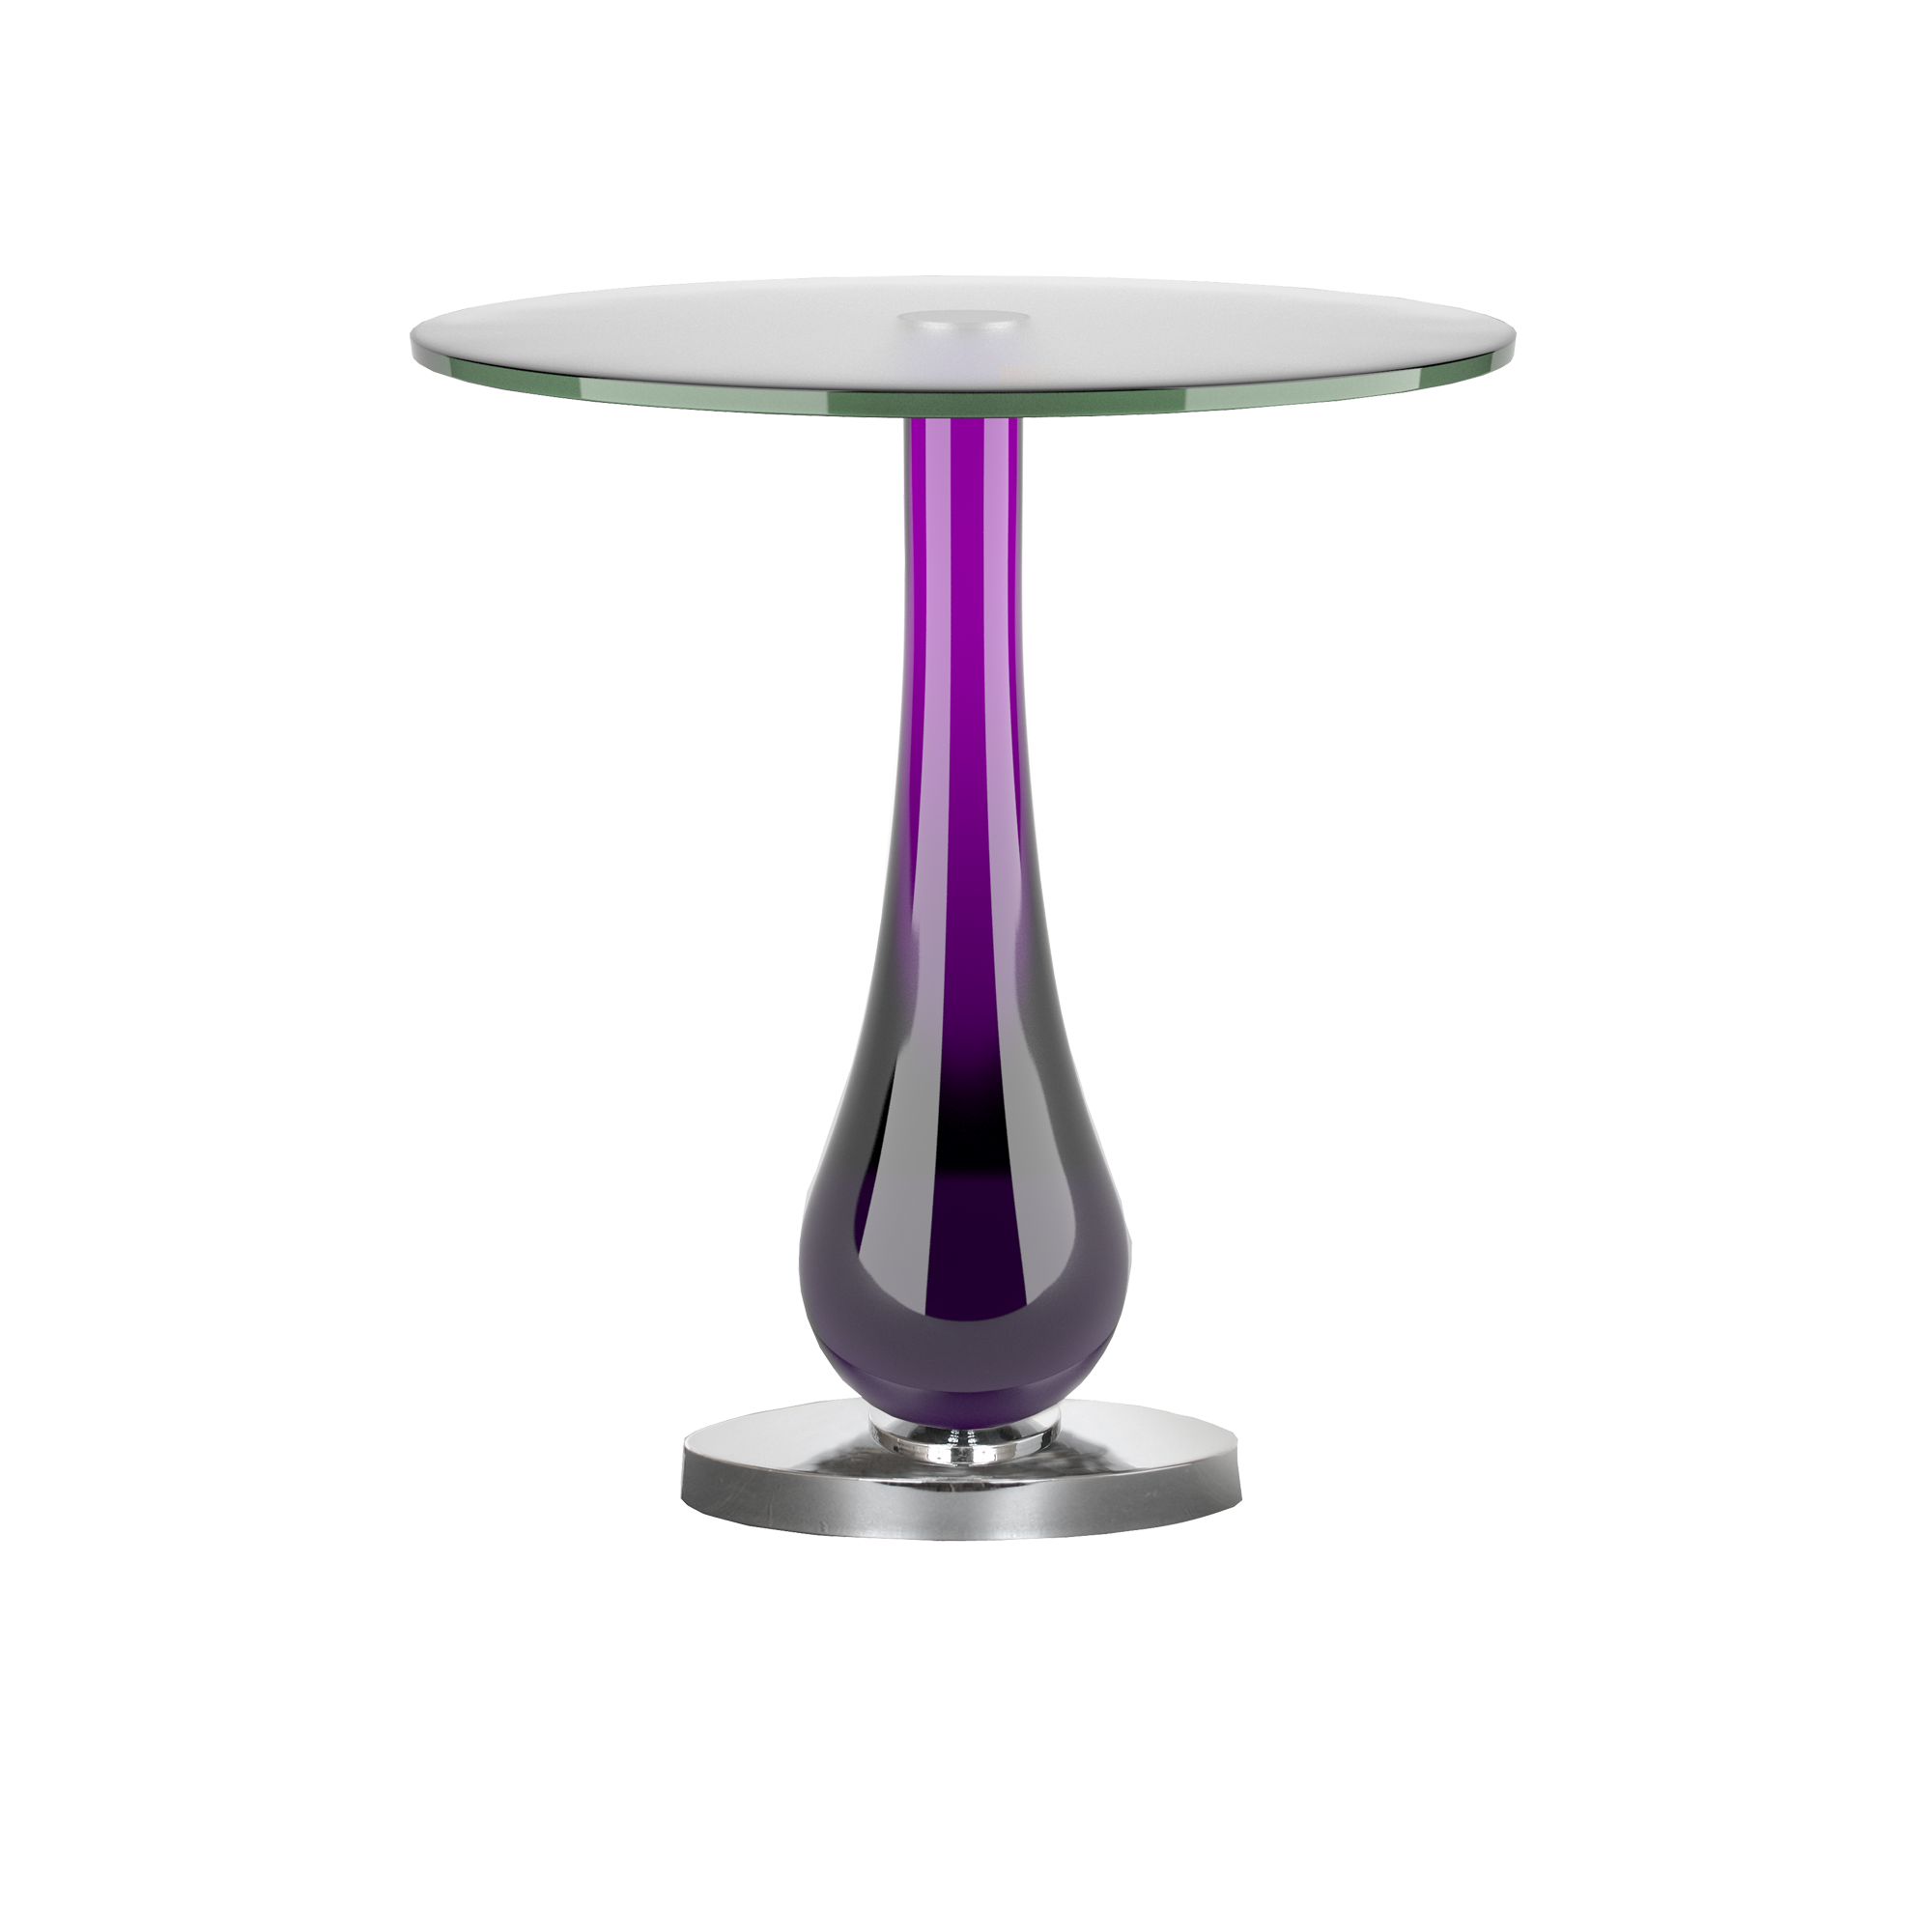 pio purple acrylic contemporary end tables modern table bathroom storage samsung furniture restoration montreal nightstand diy ideas mission style night stands bedroom rustic